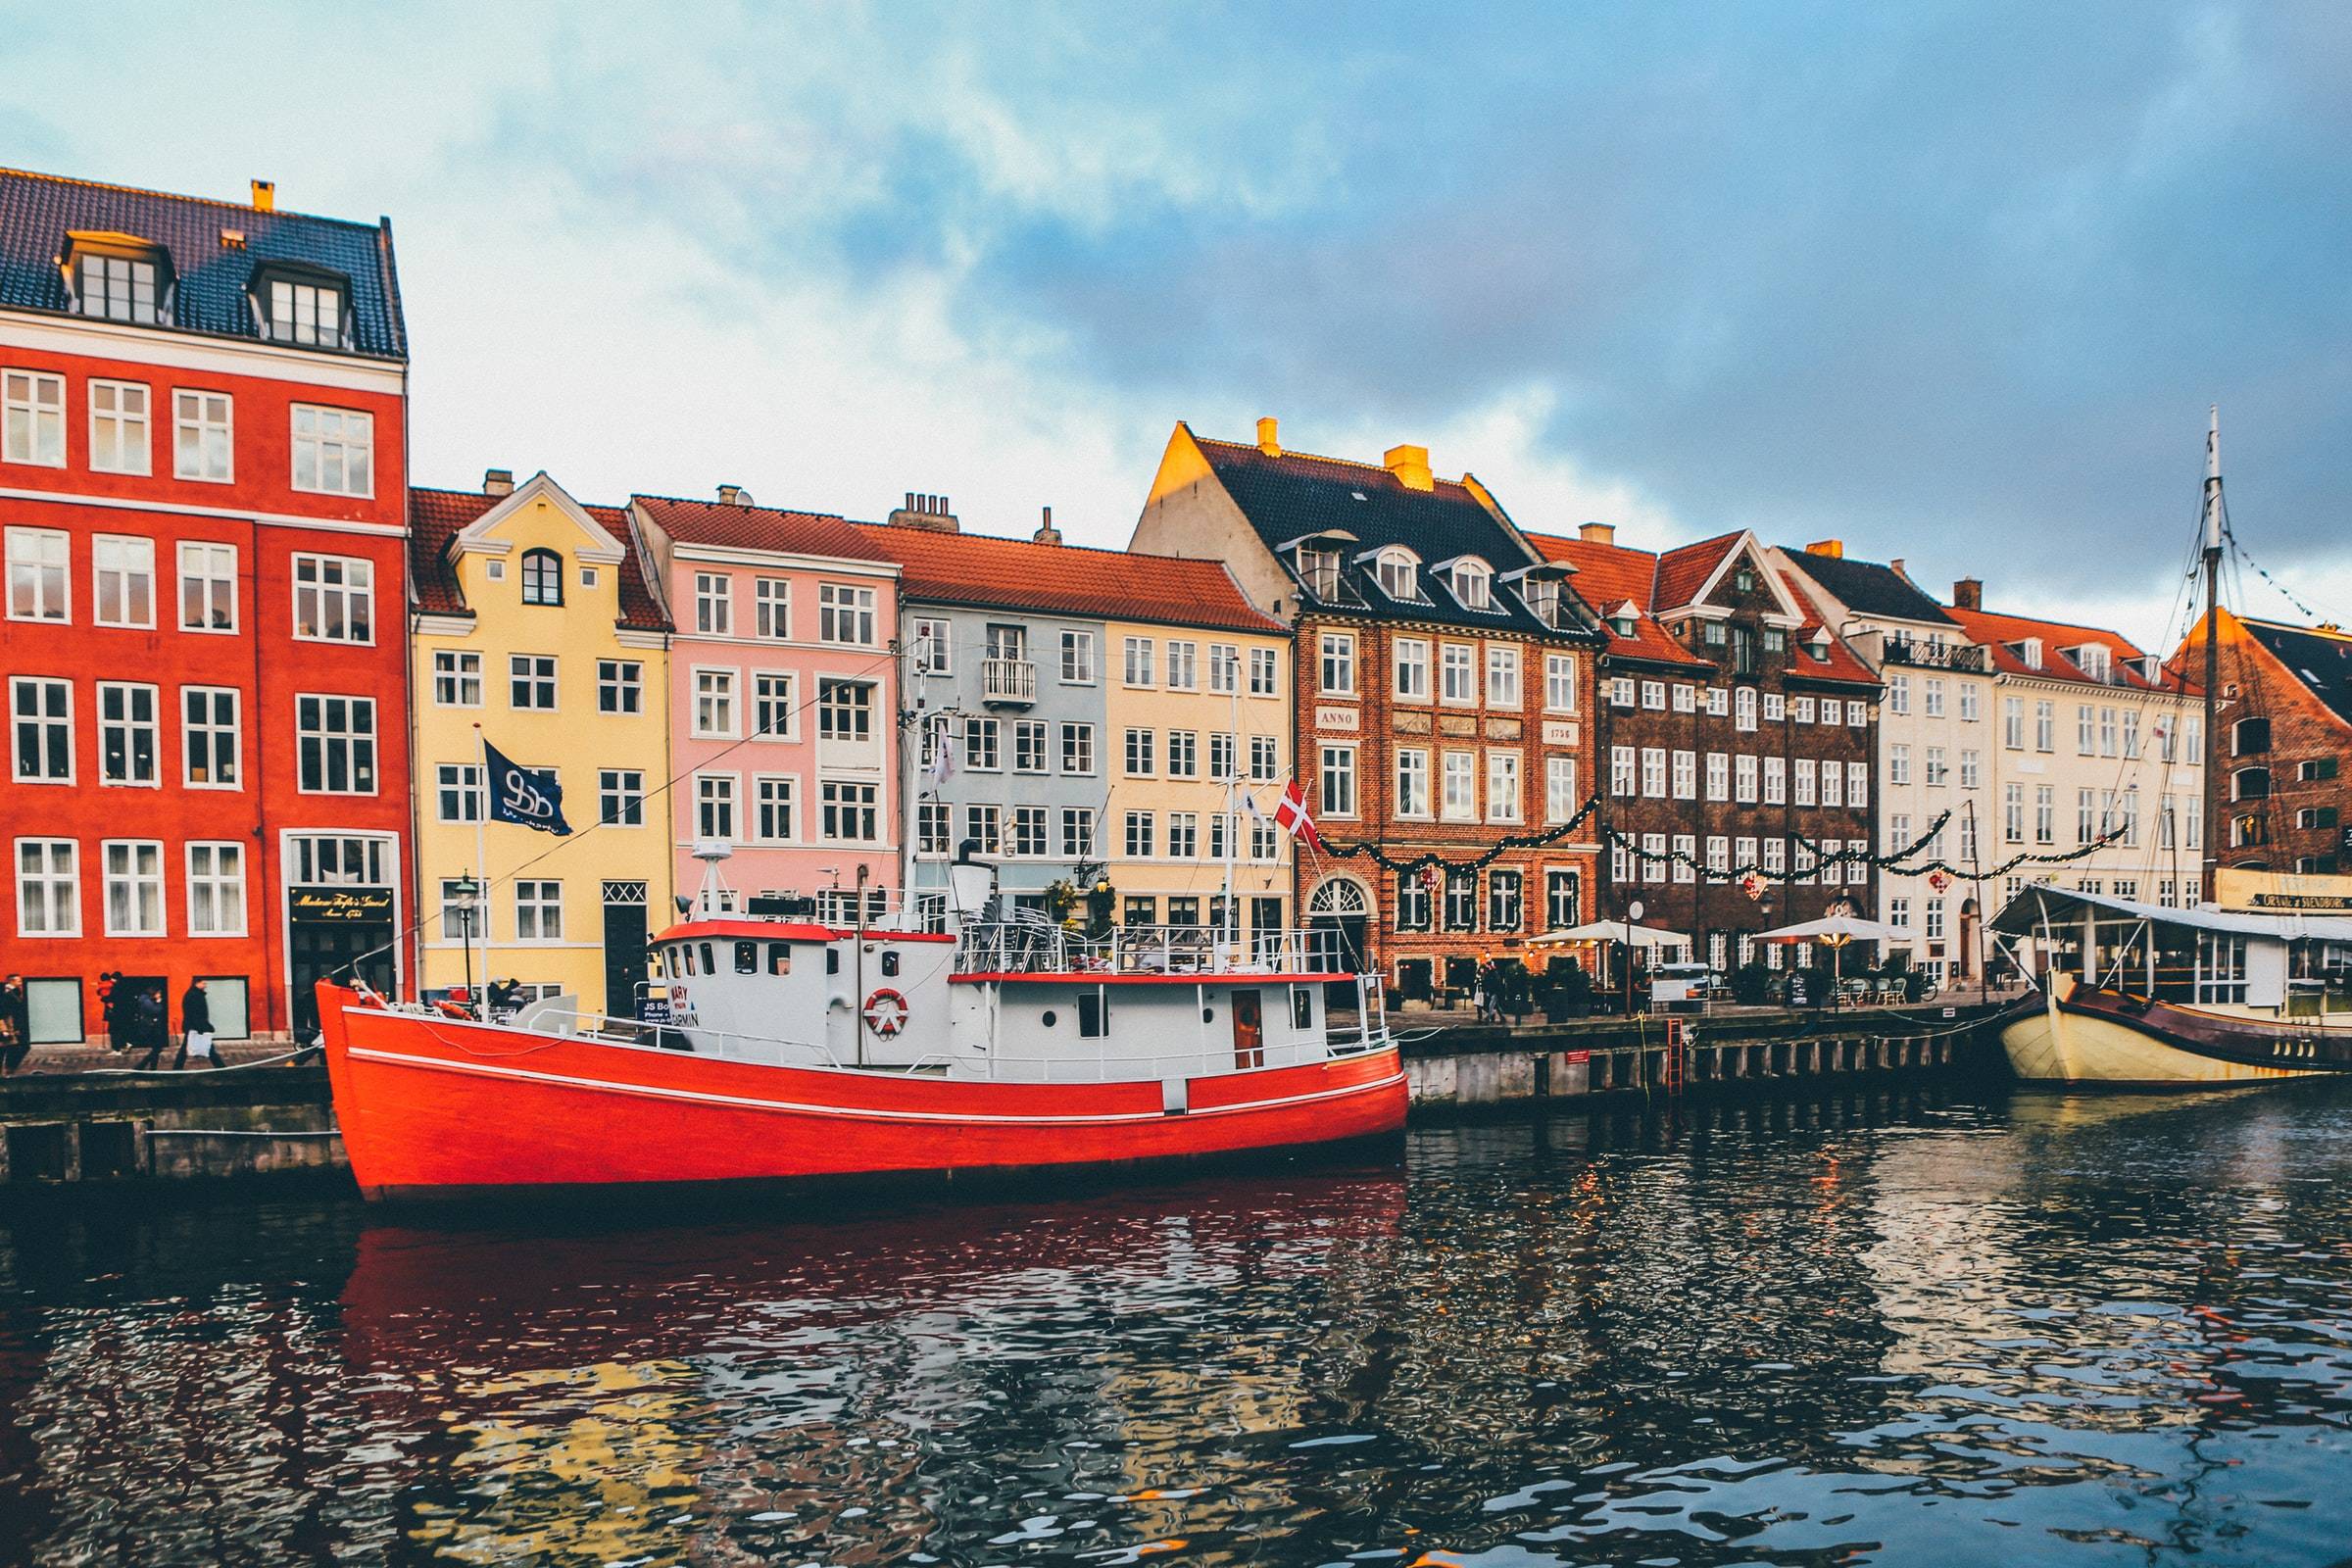 Denmark has introduced the highest corporate carbon tax in Europe